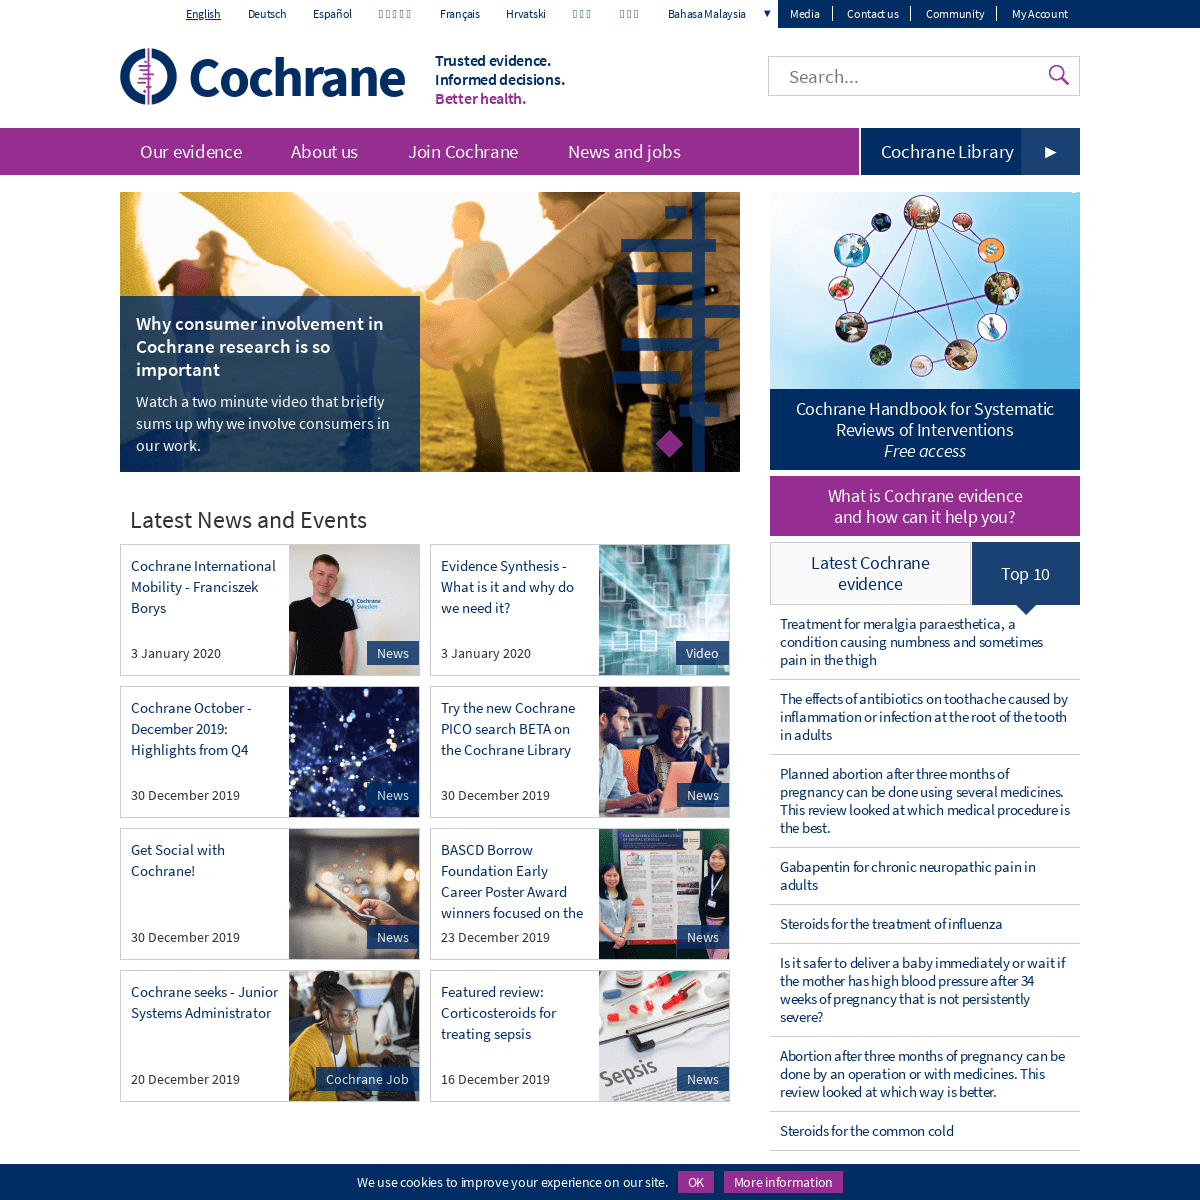 Cochrane - Trusted evidence. Informed decisions. Better health.